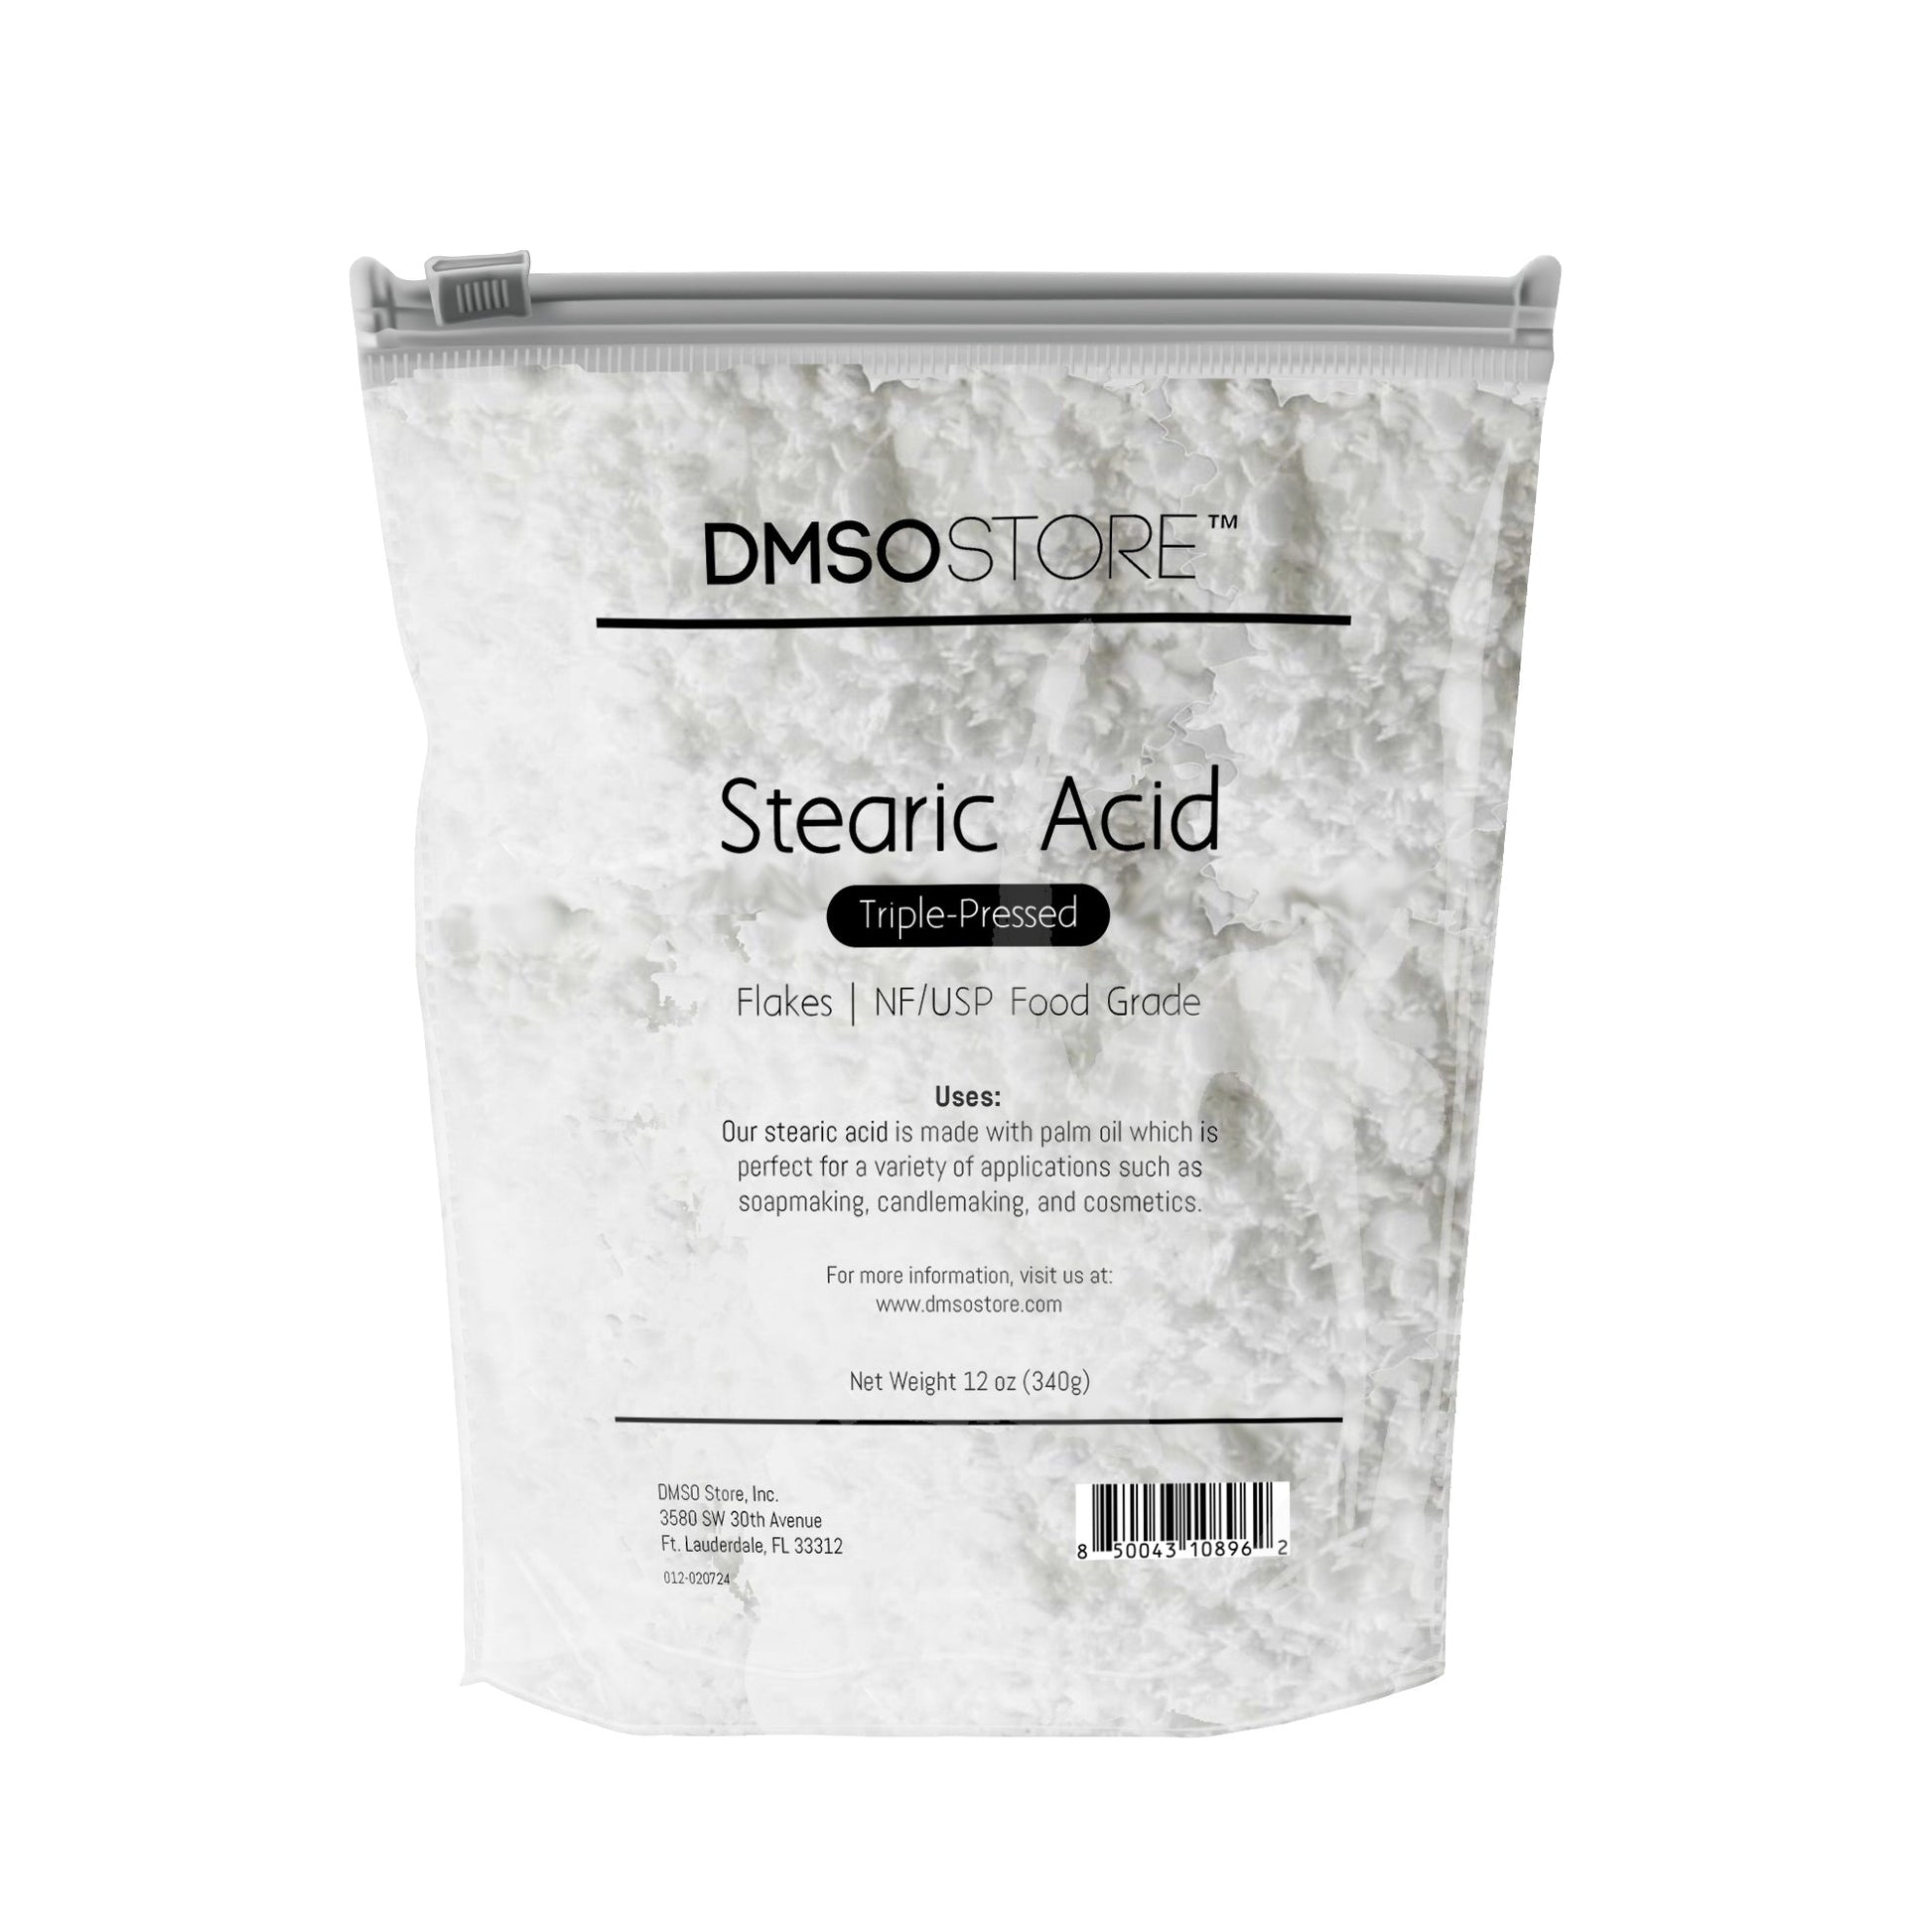 12 oz. DMSO Store brand Stearic Acid flakes, triple-pressed and NF/USP food grade, for soap making, candle making, and cosmetics. 